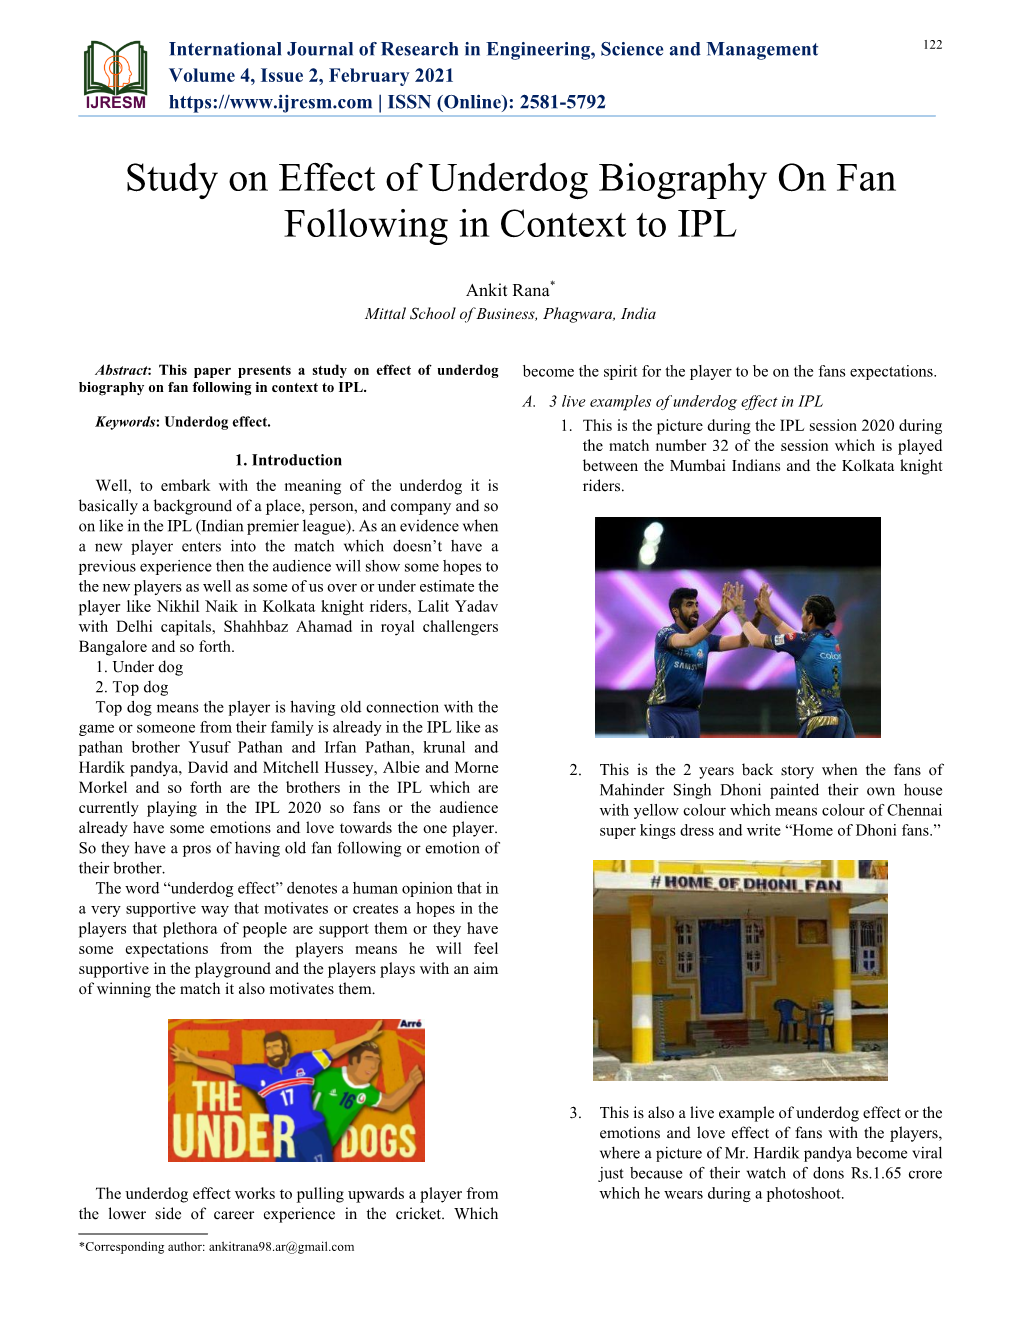 Study on Effect of Underdog Biography on Fan Following in Context to IPL